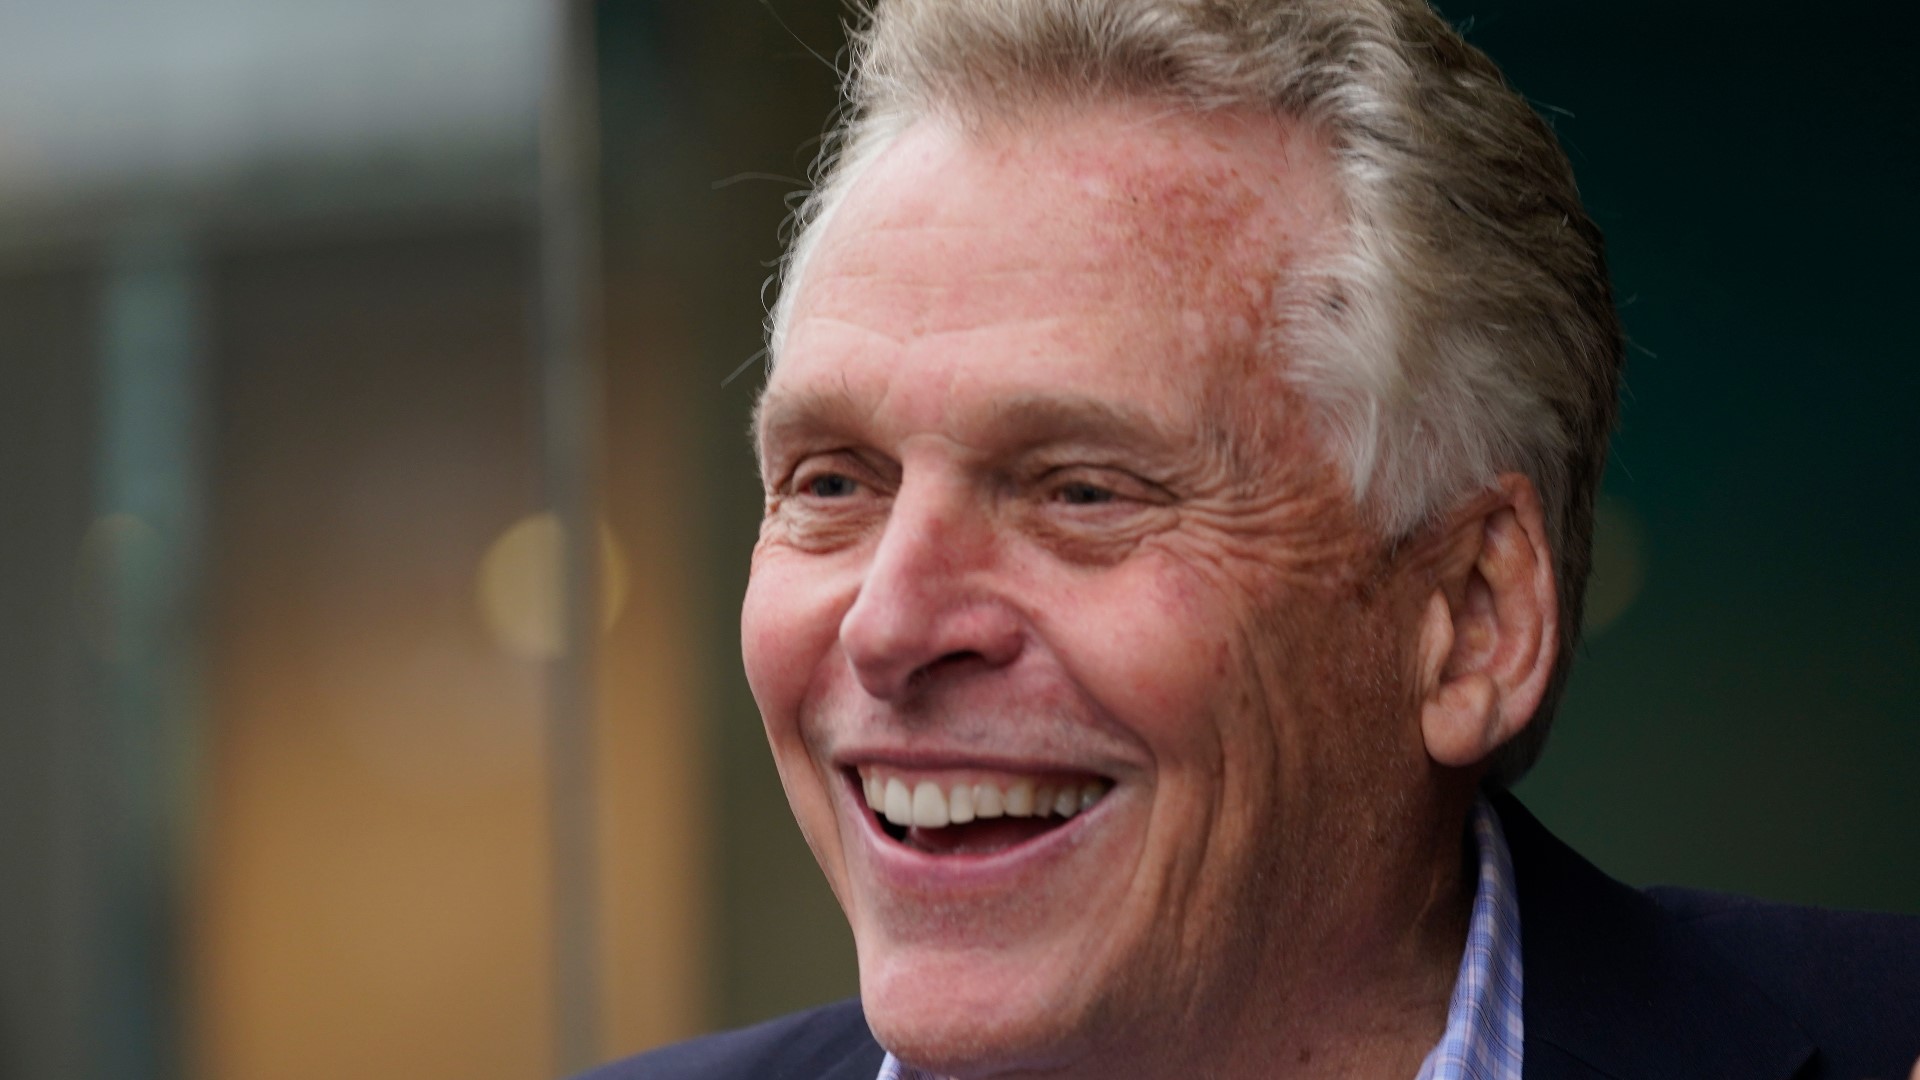 WUSA9 is inside Democrat Terry McAuliffe's campaign as he prepares for the Virginia Governor's race results in McClean, Virginia.